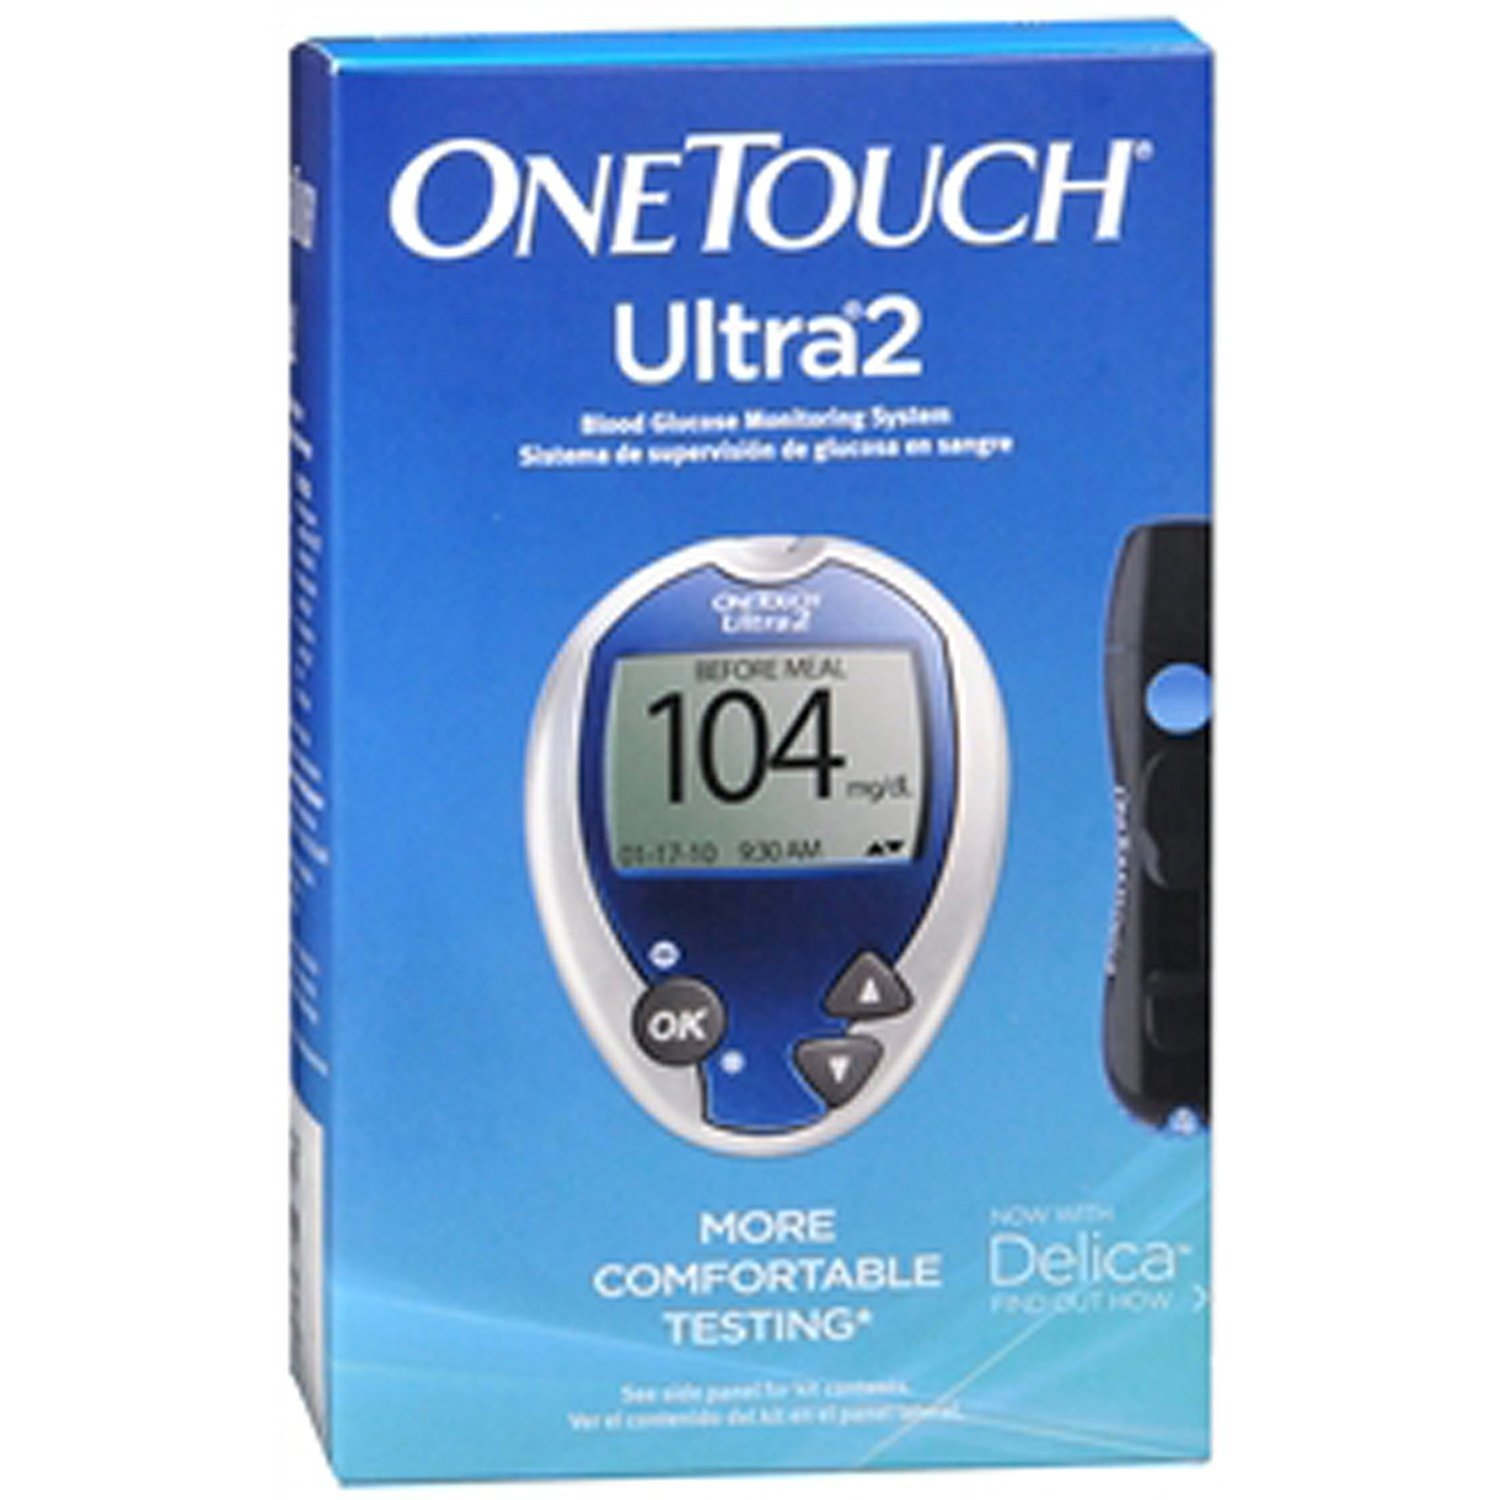 OneTouch Ultra 2 Blood Glucose Monitoring System - image 2 of 2